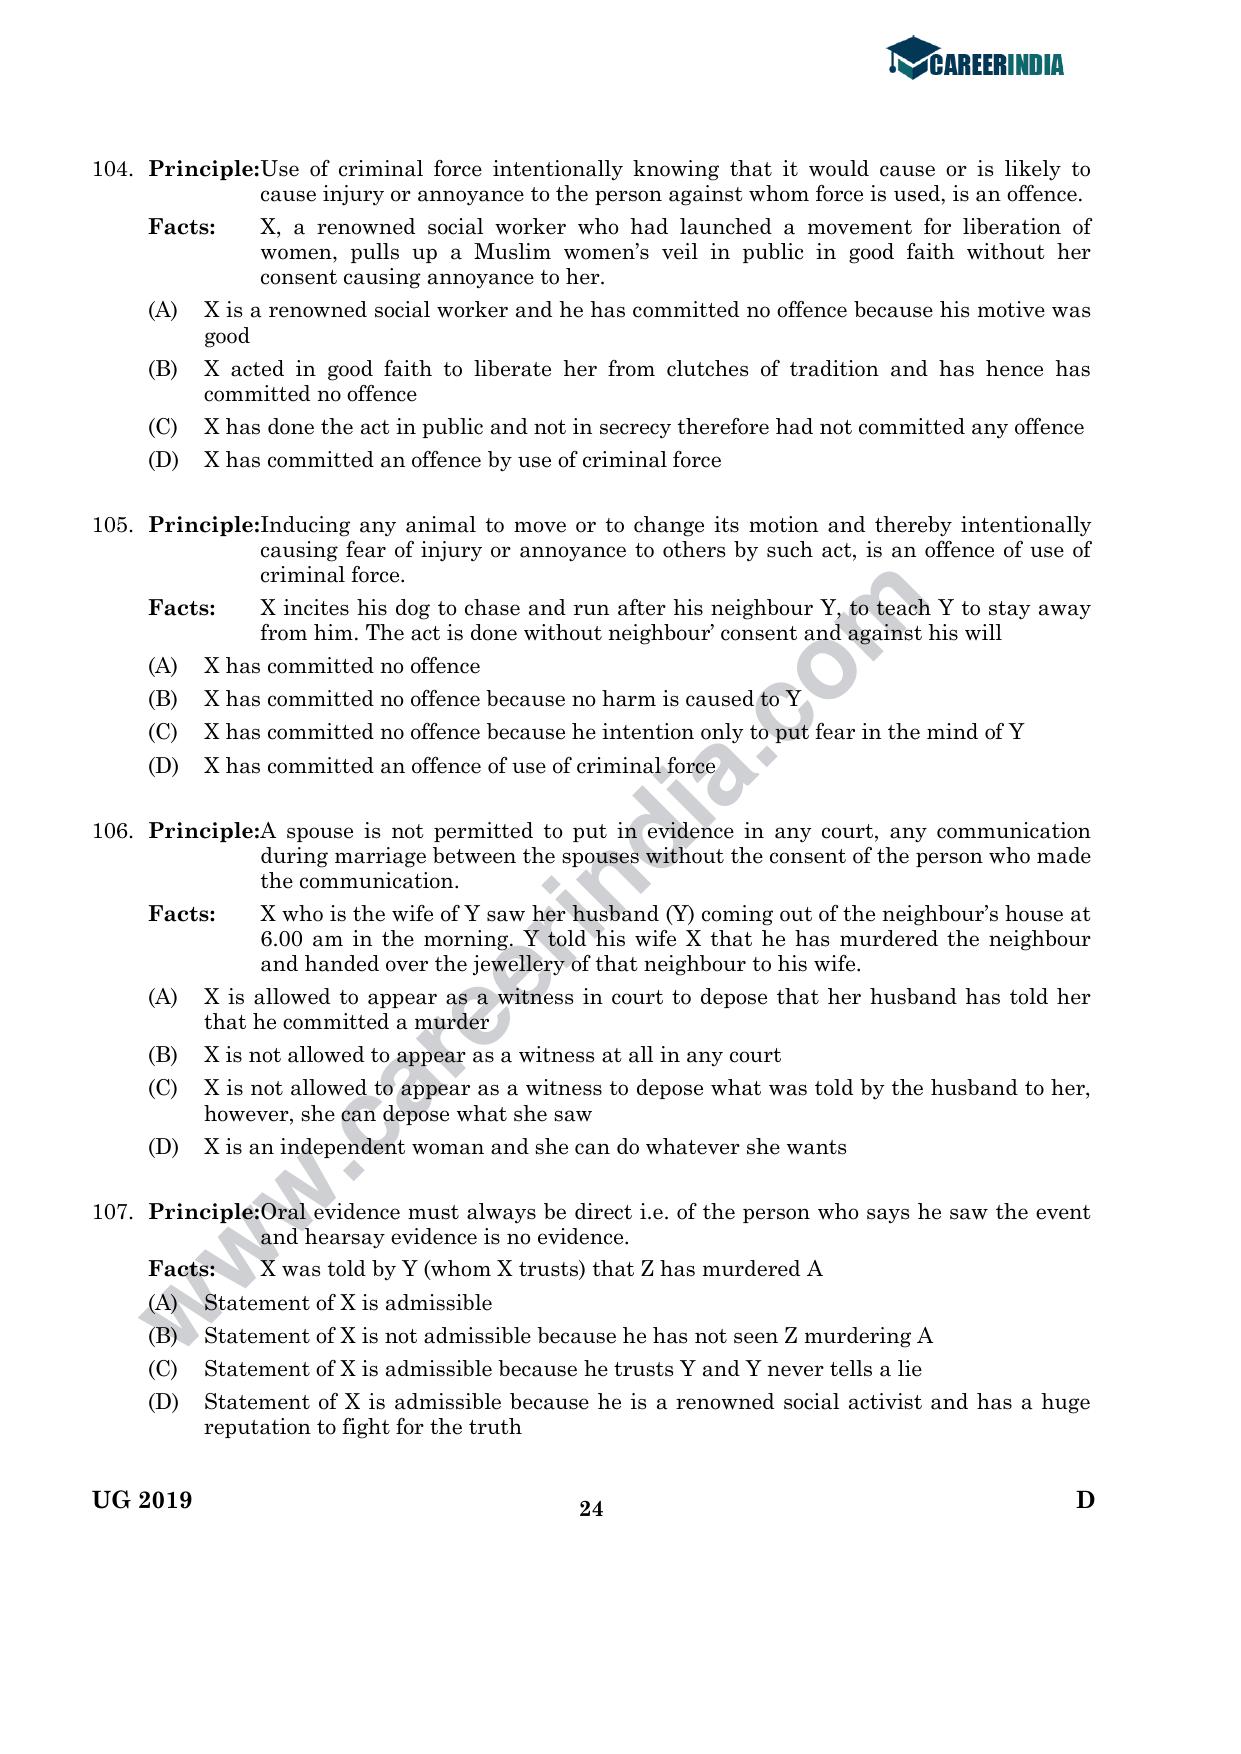 CLAT 2019 UG Logical-Reasoning Question Paper - Page 23